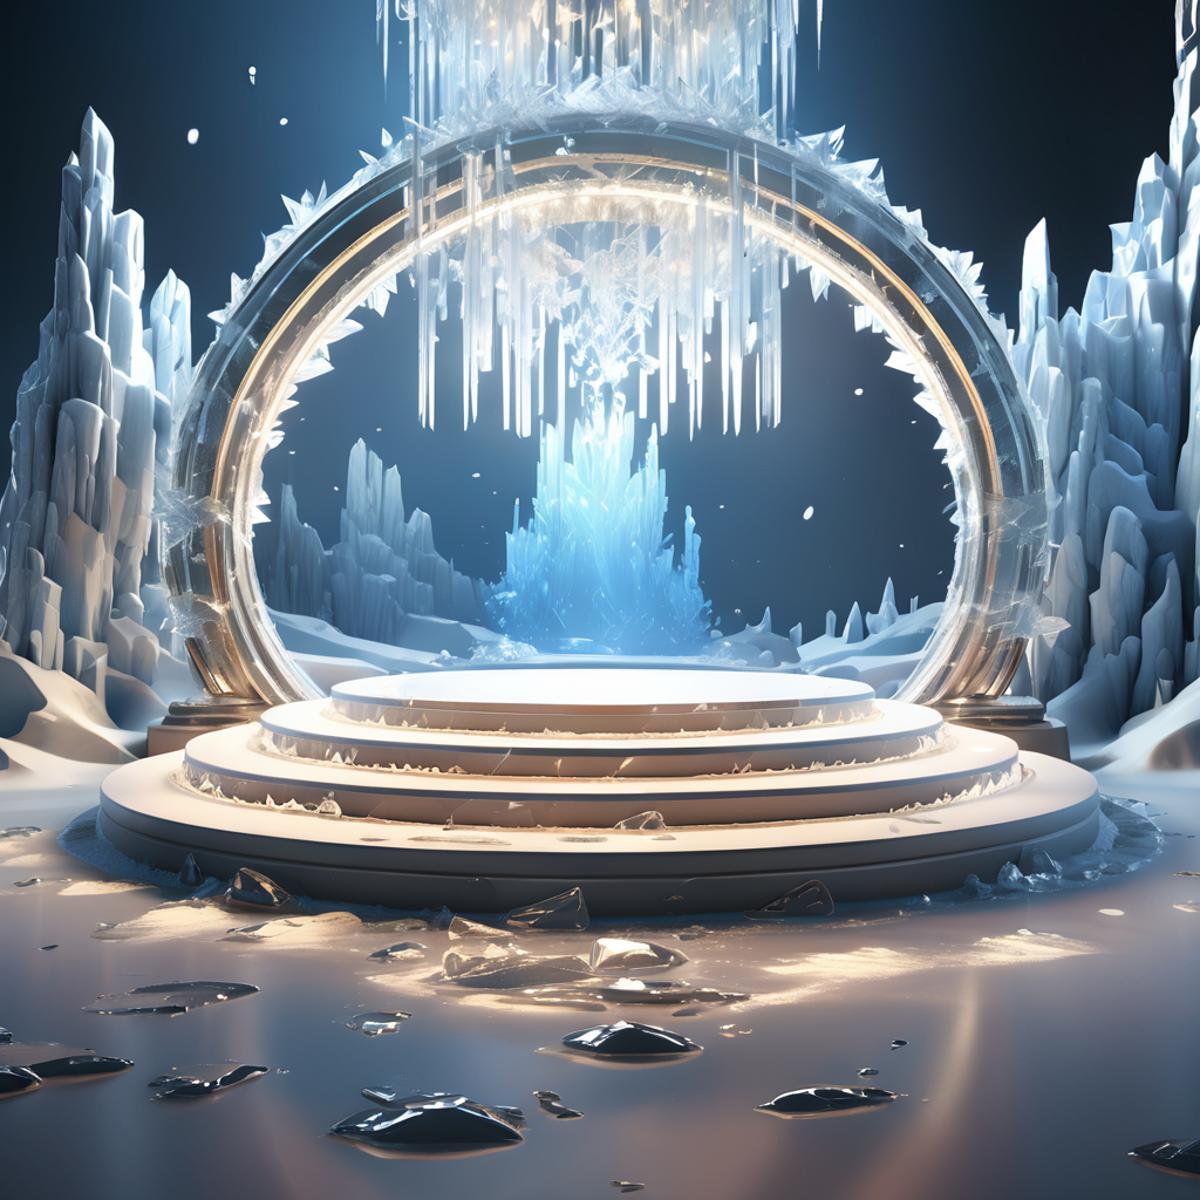 A fantasy scene with a large archway, stairs, and an ice palace.